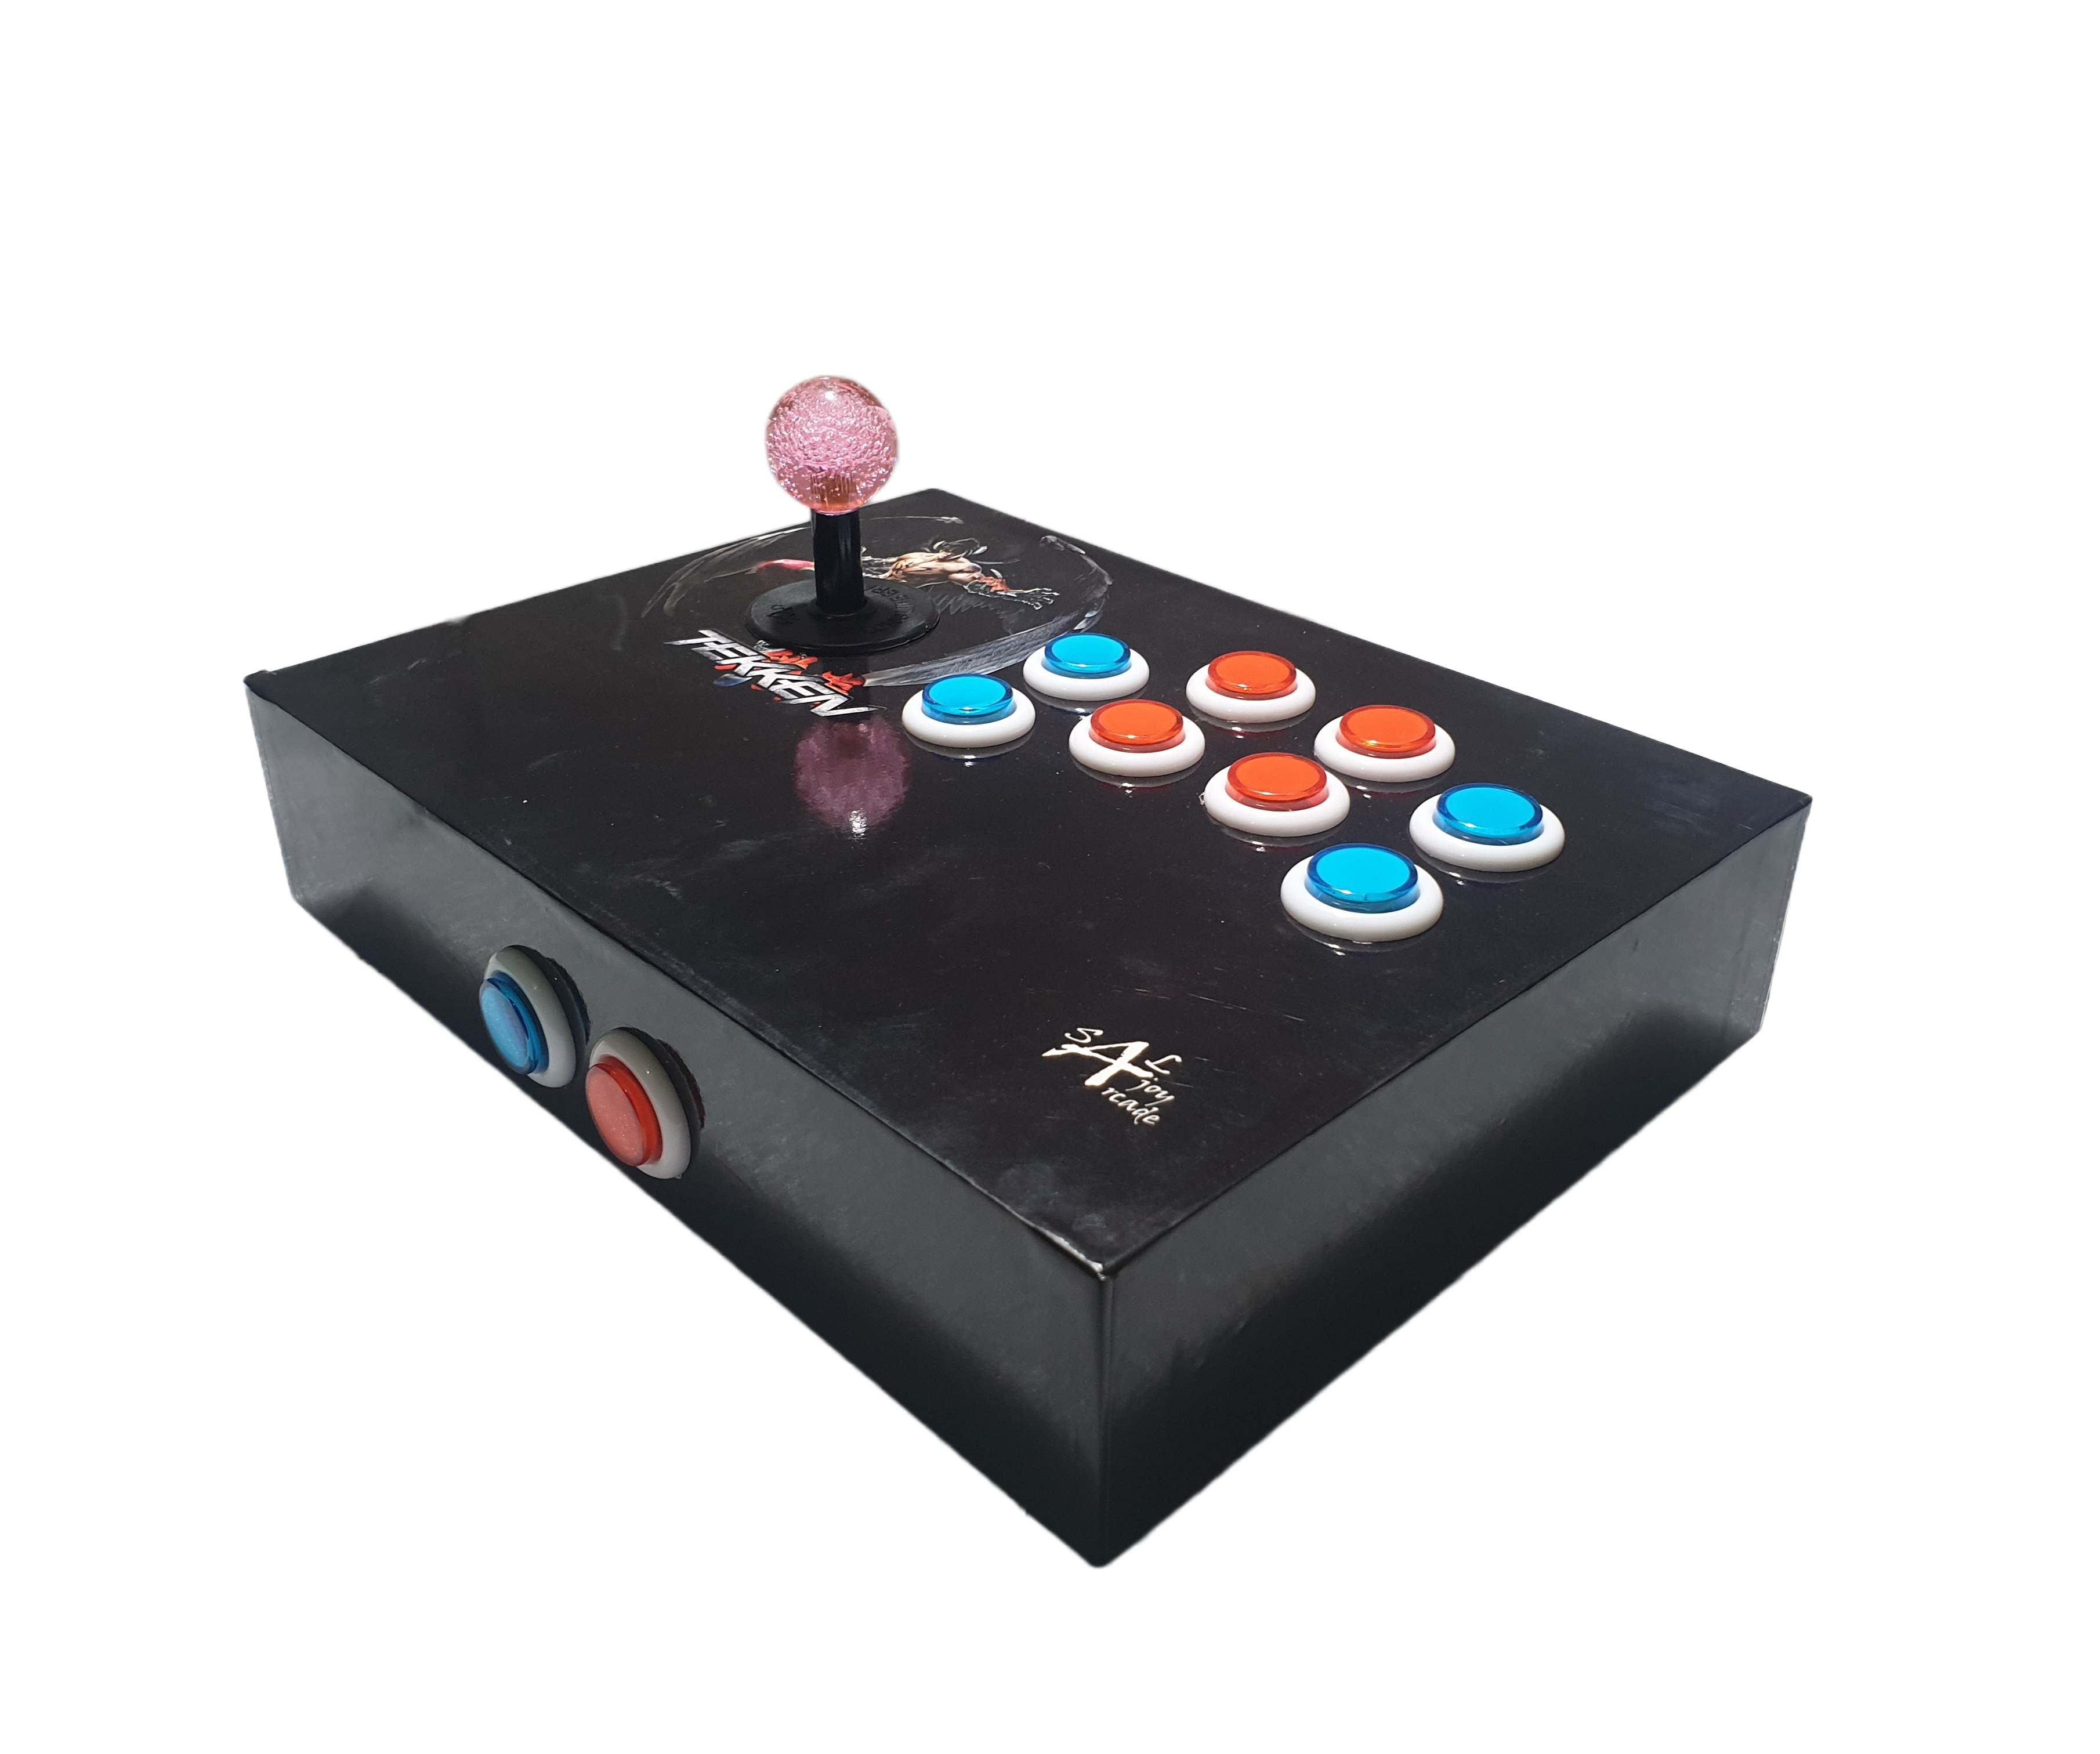 PS4 USB Arcade joystick for PS4, PS3, PC Windows and Android Mobiles